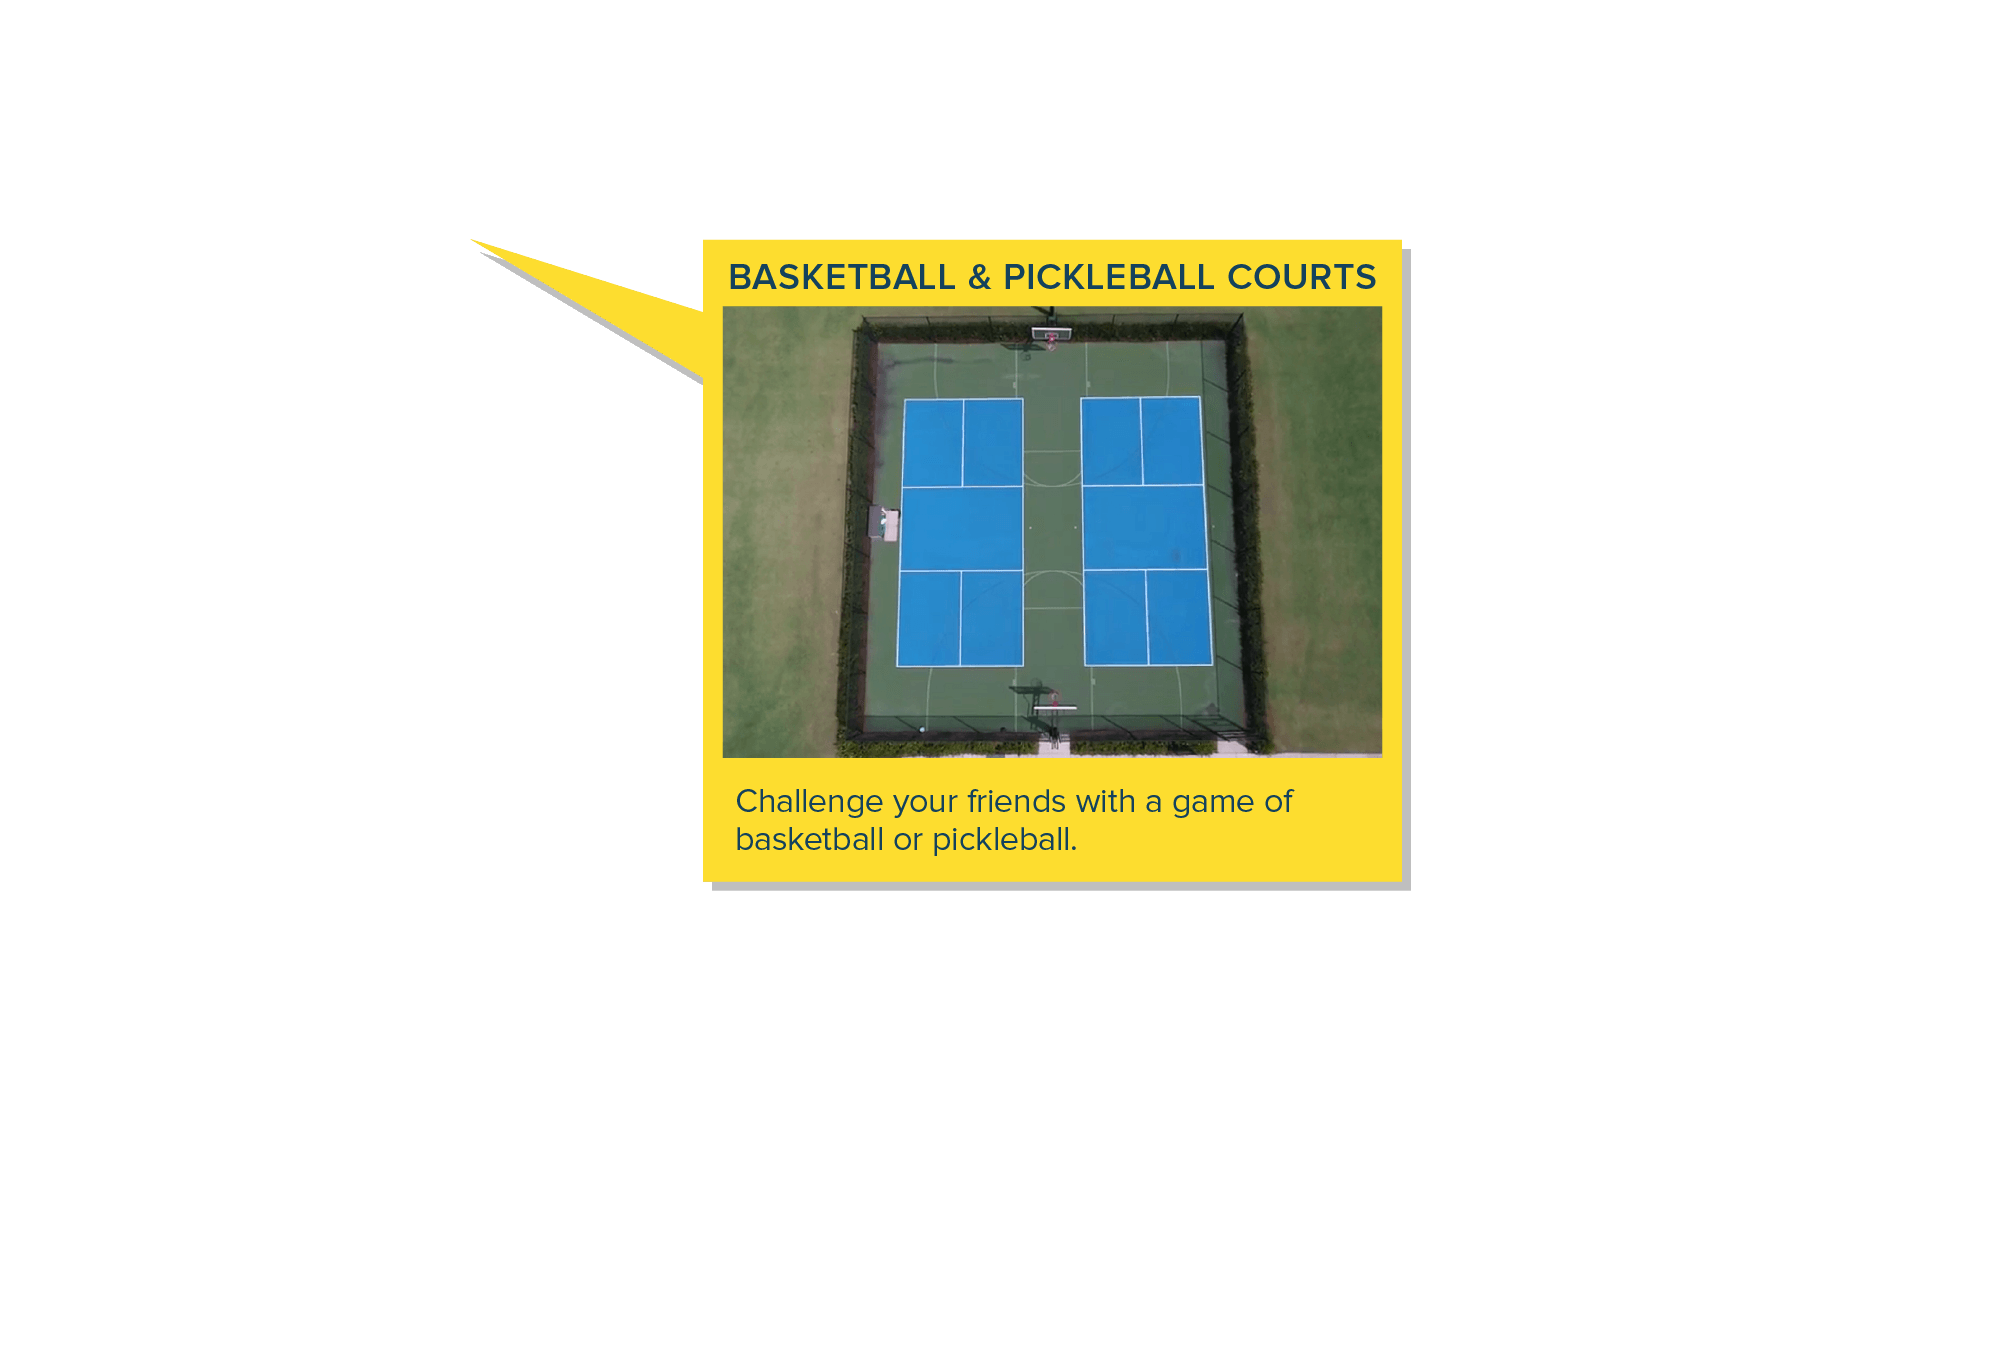 sports courts